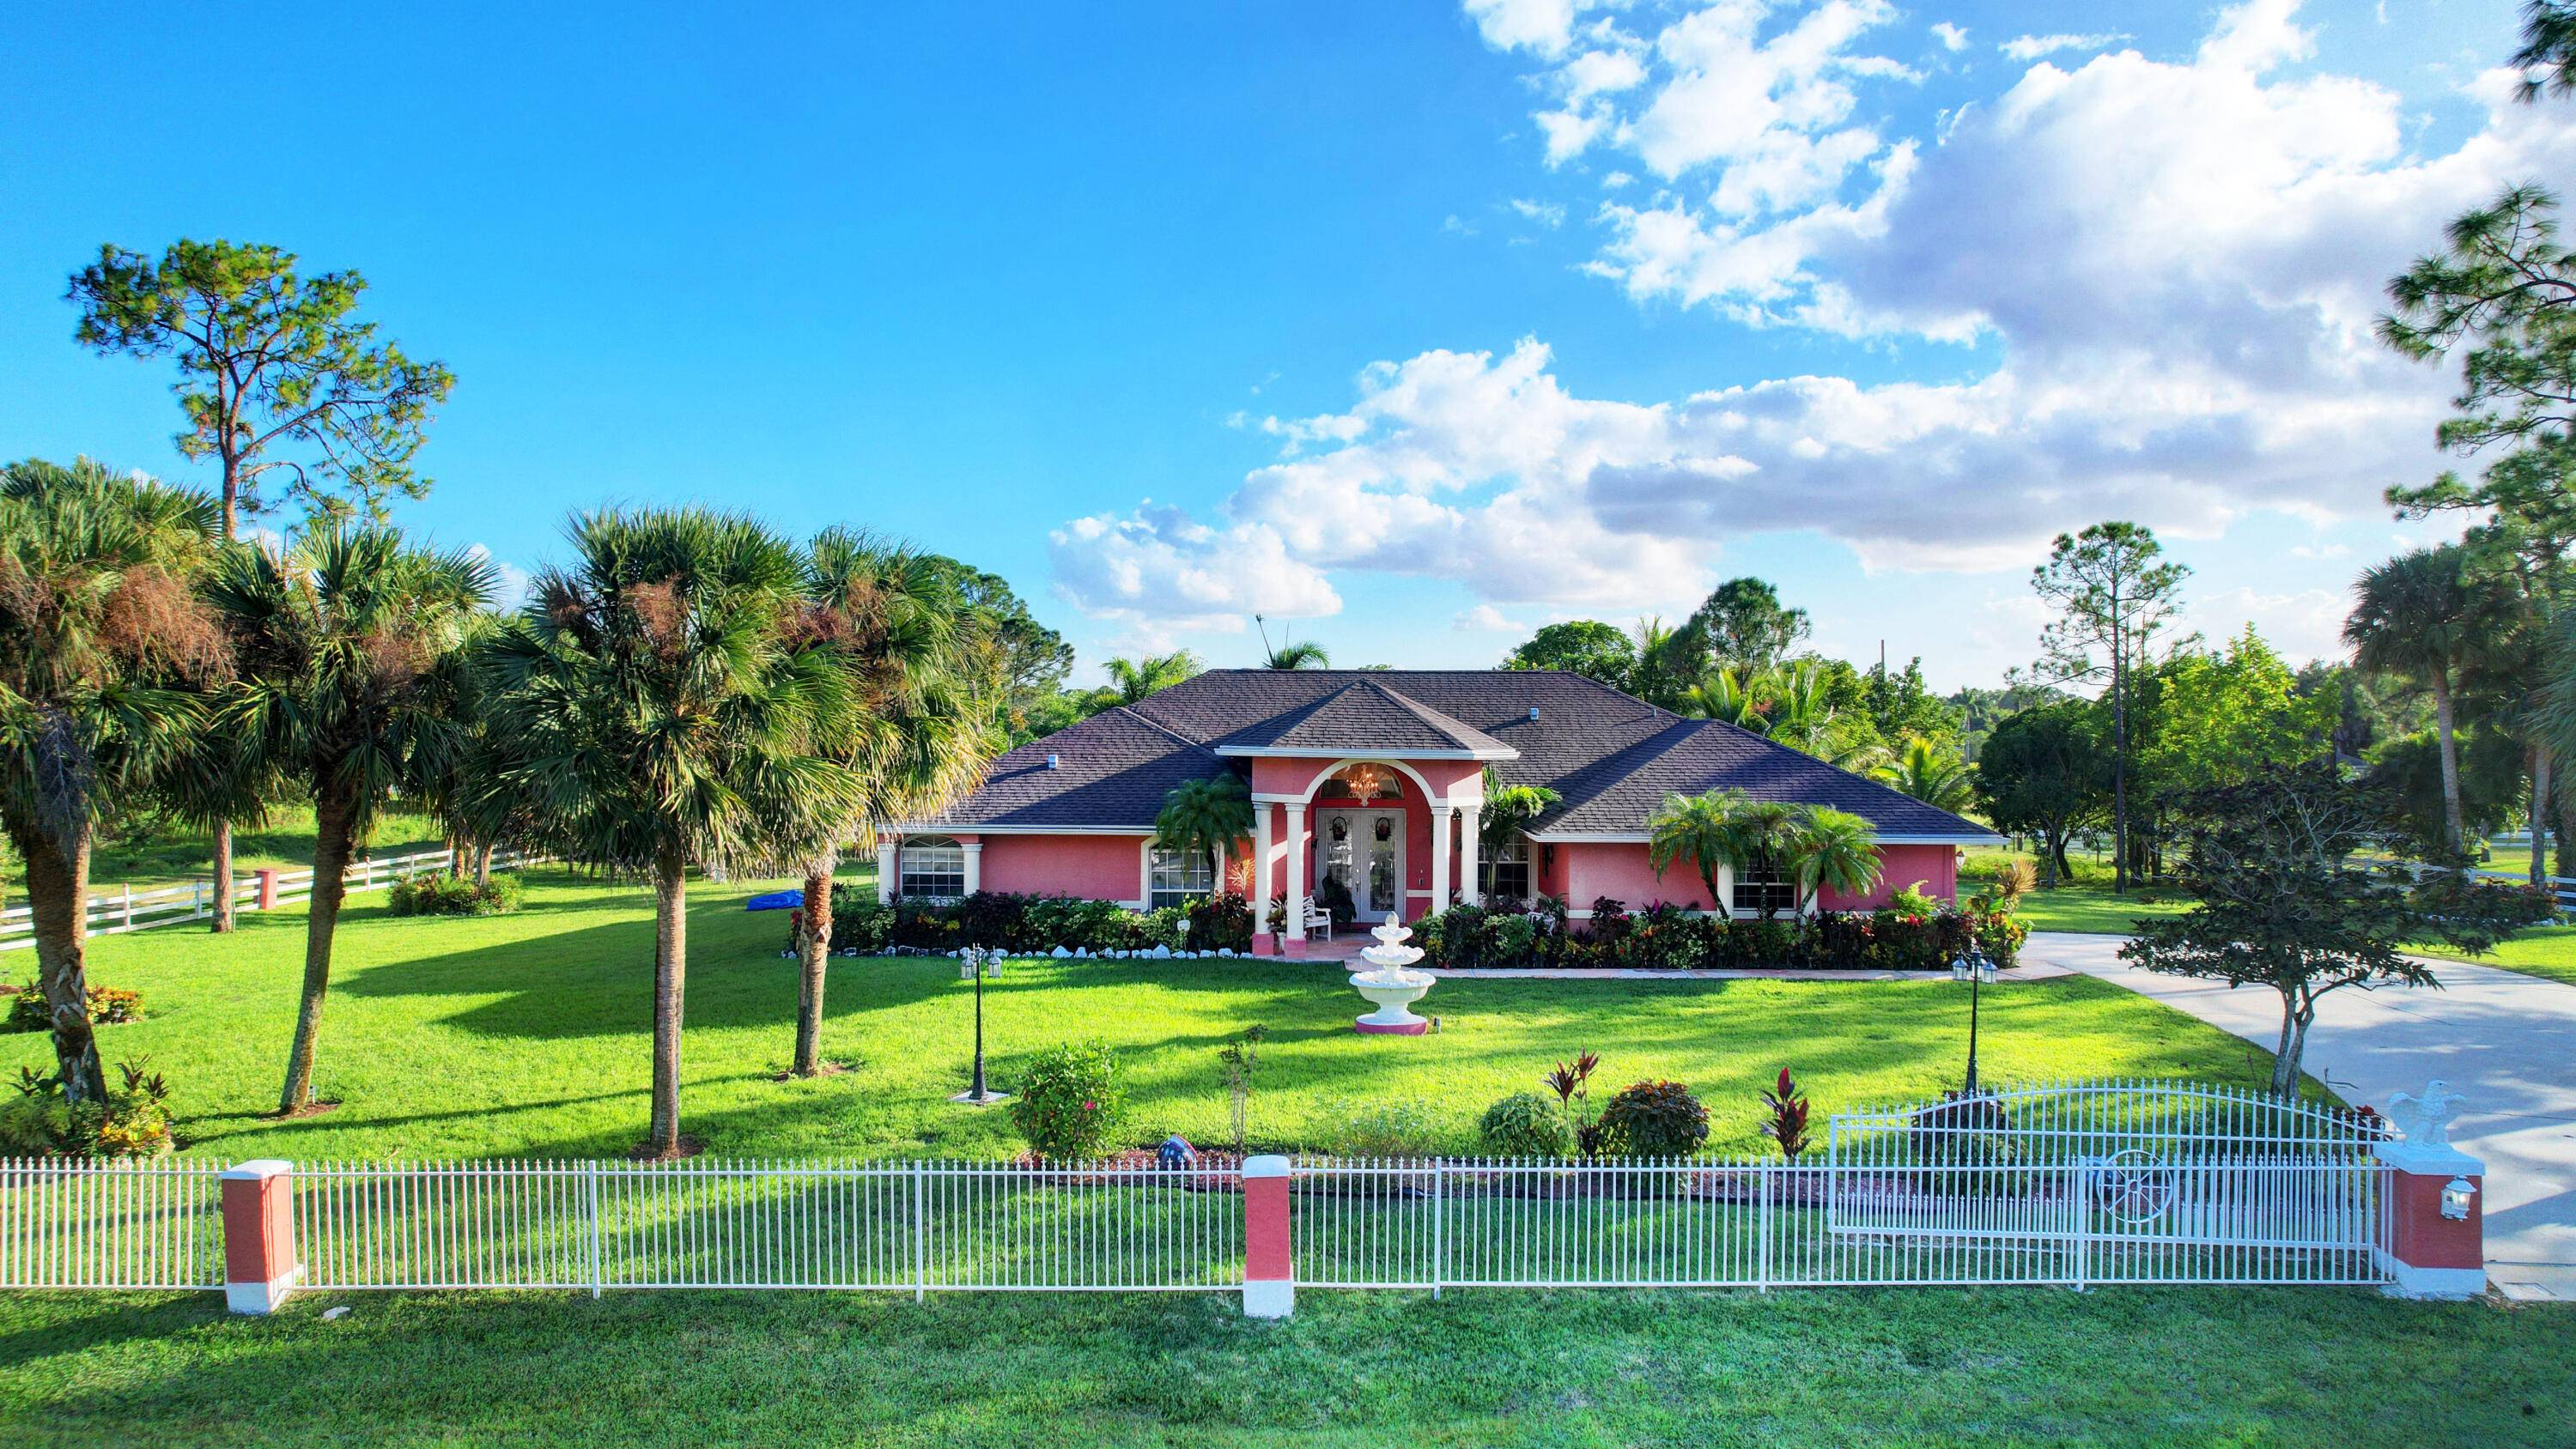 Stunning single story residence nestled on a private, gated 1 acre lot in Loxahatchee FL.